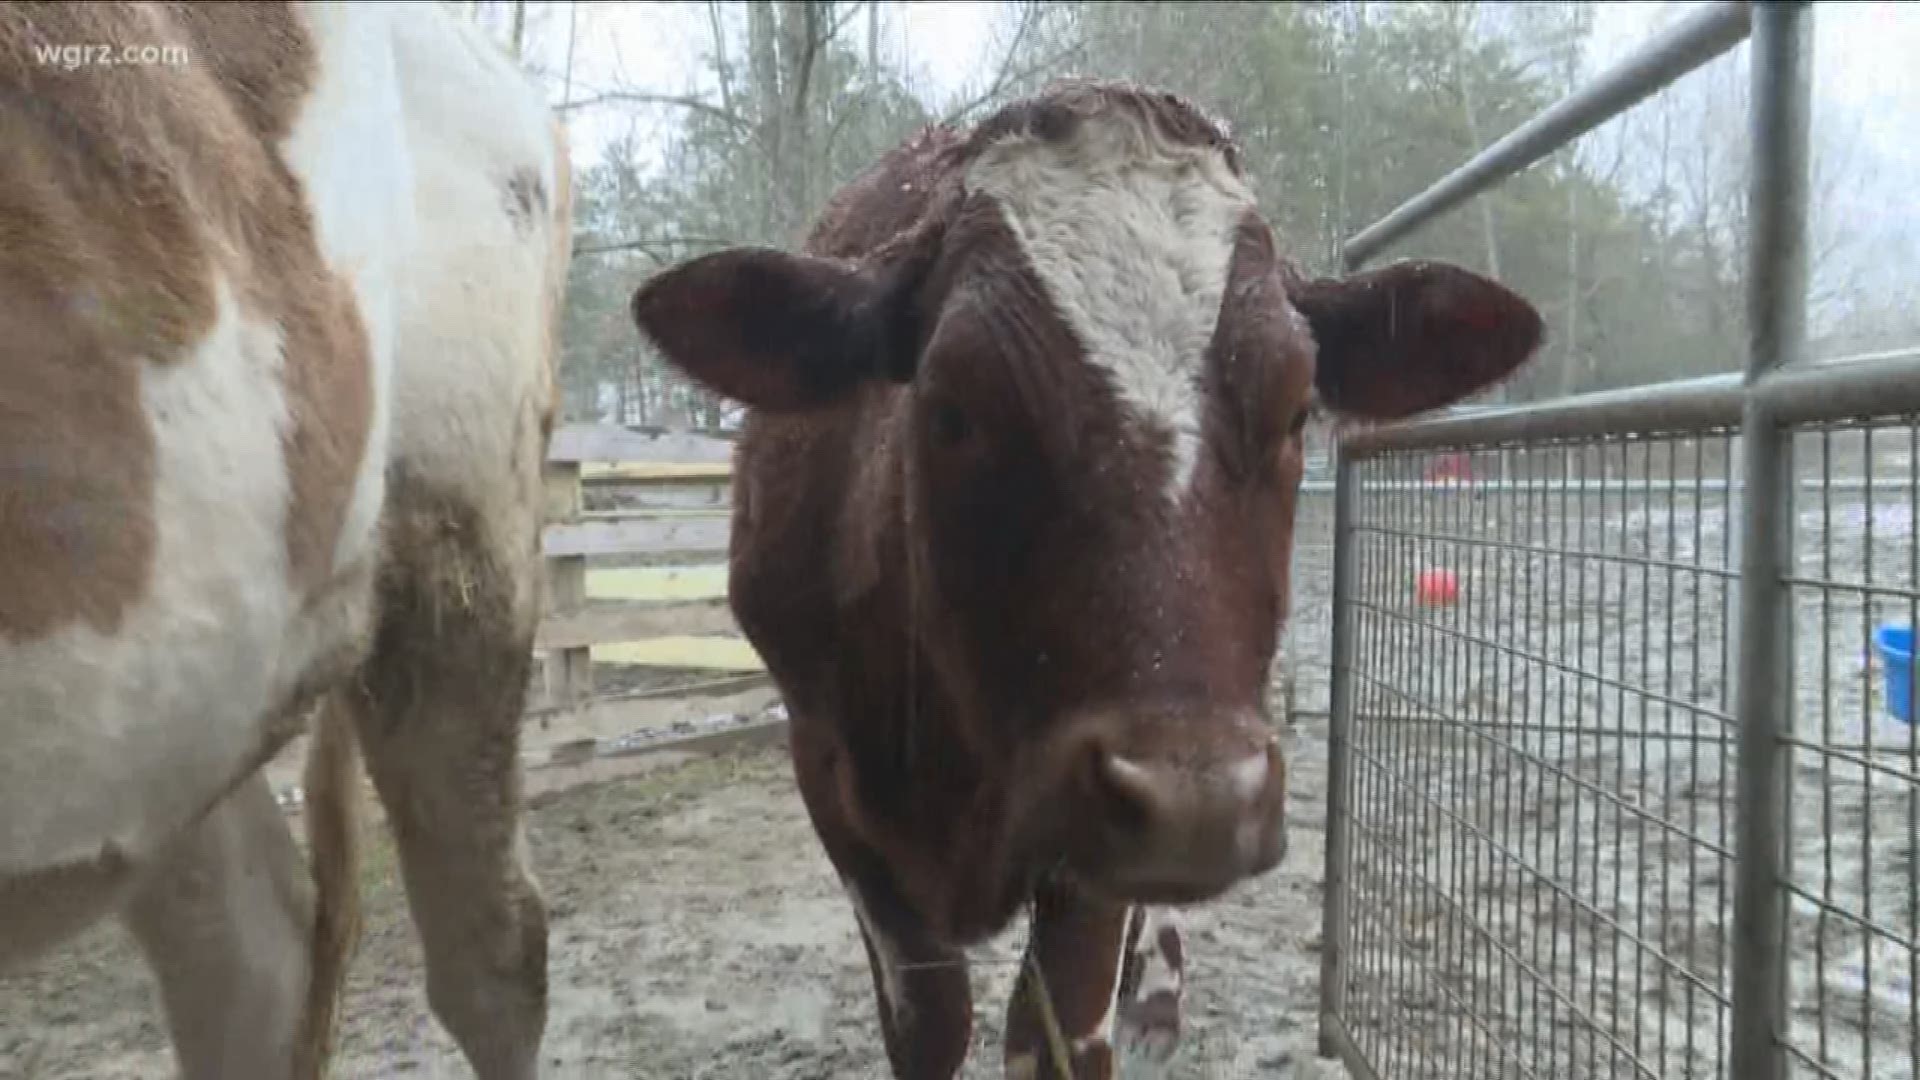 Tracy Murphy, founder of Asha's Farm Sanctuary in Newfane, rescues farm animals that would otherwise face an unpleasant fate.